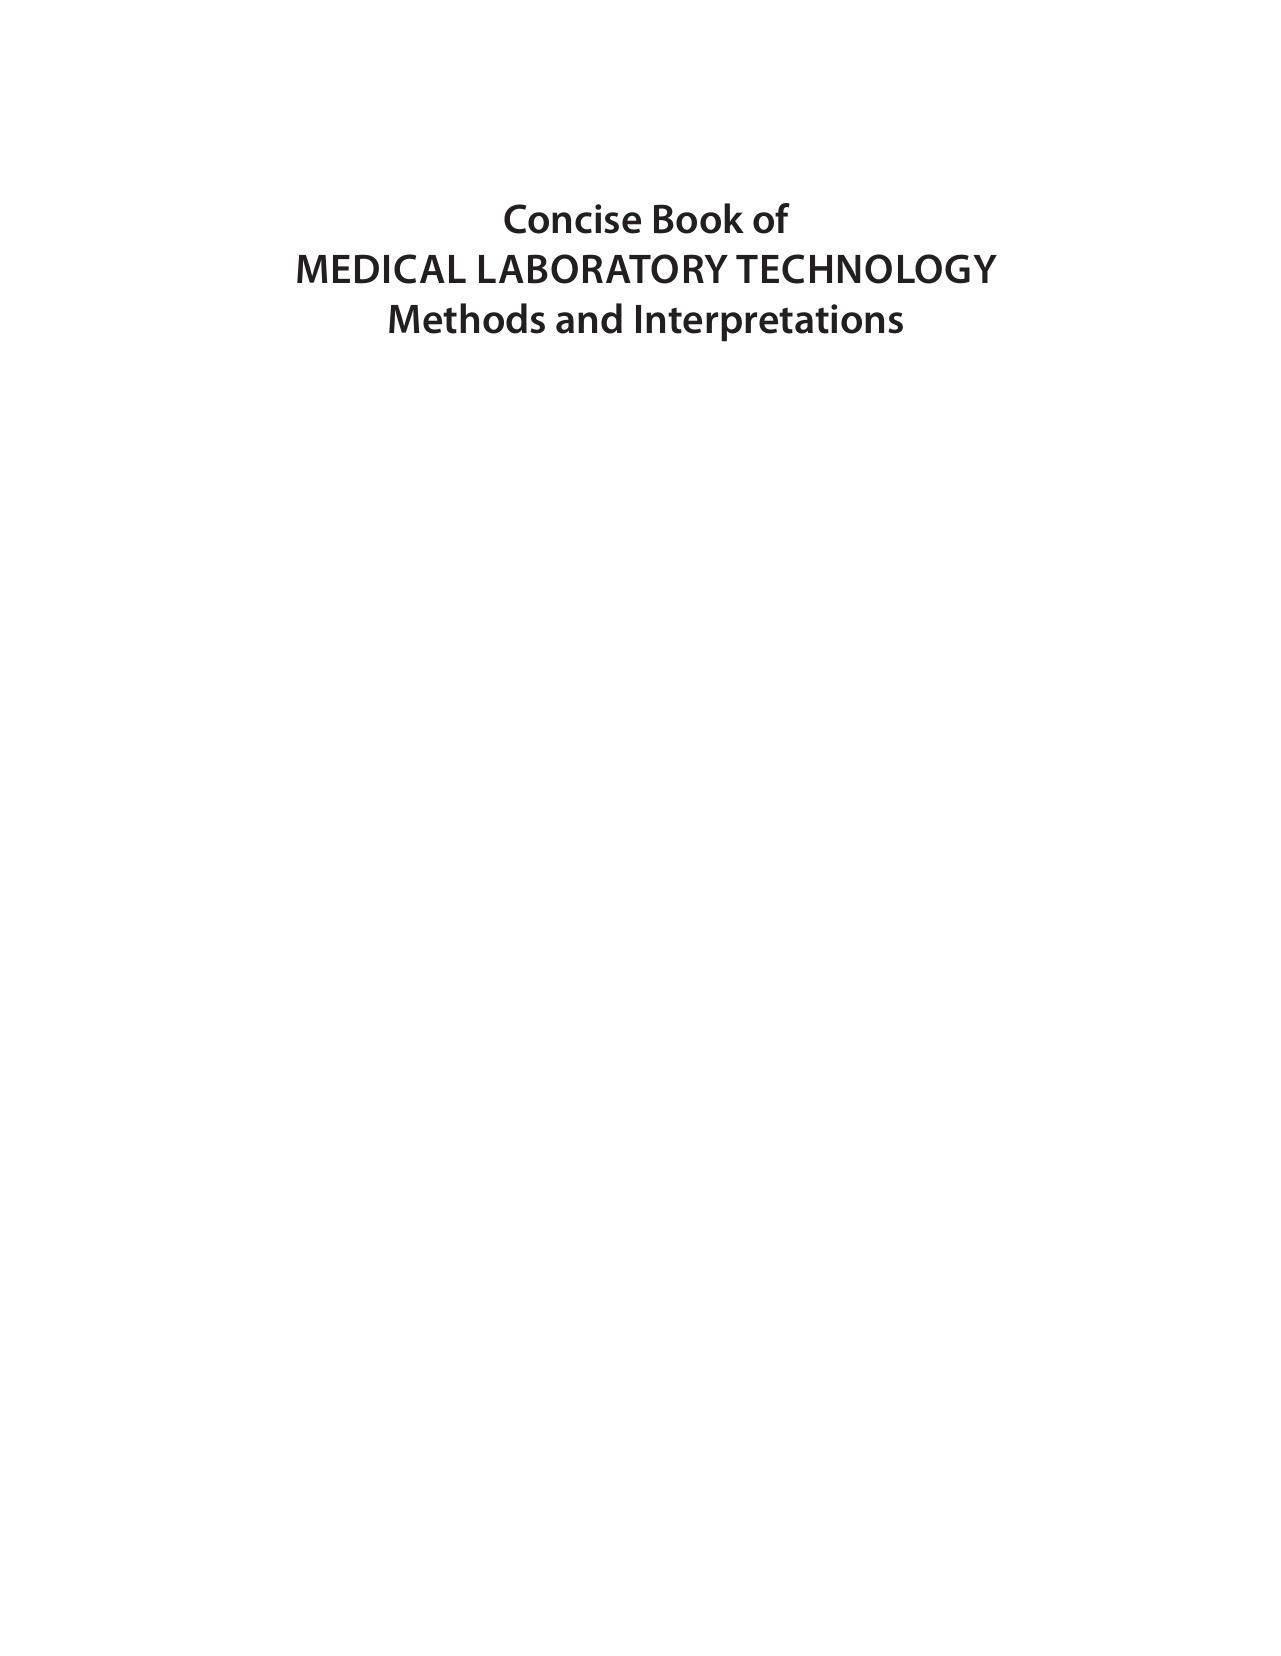 CONCISE- MEDICAL LAB TECH 2nd ed 2015